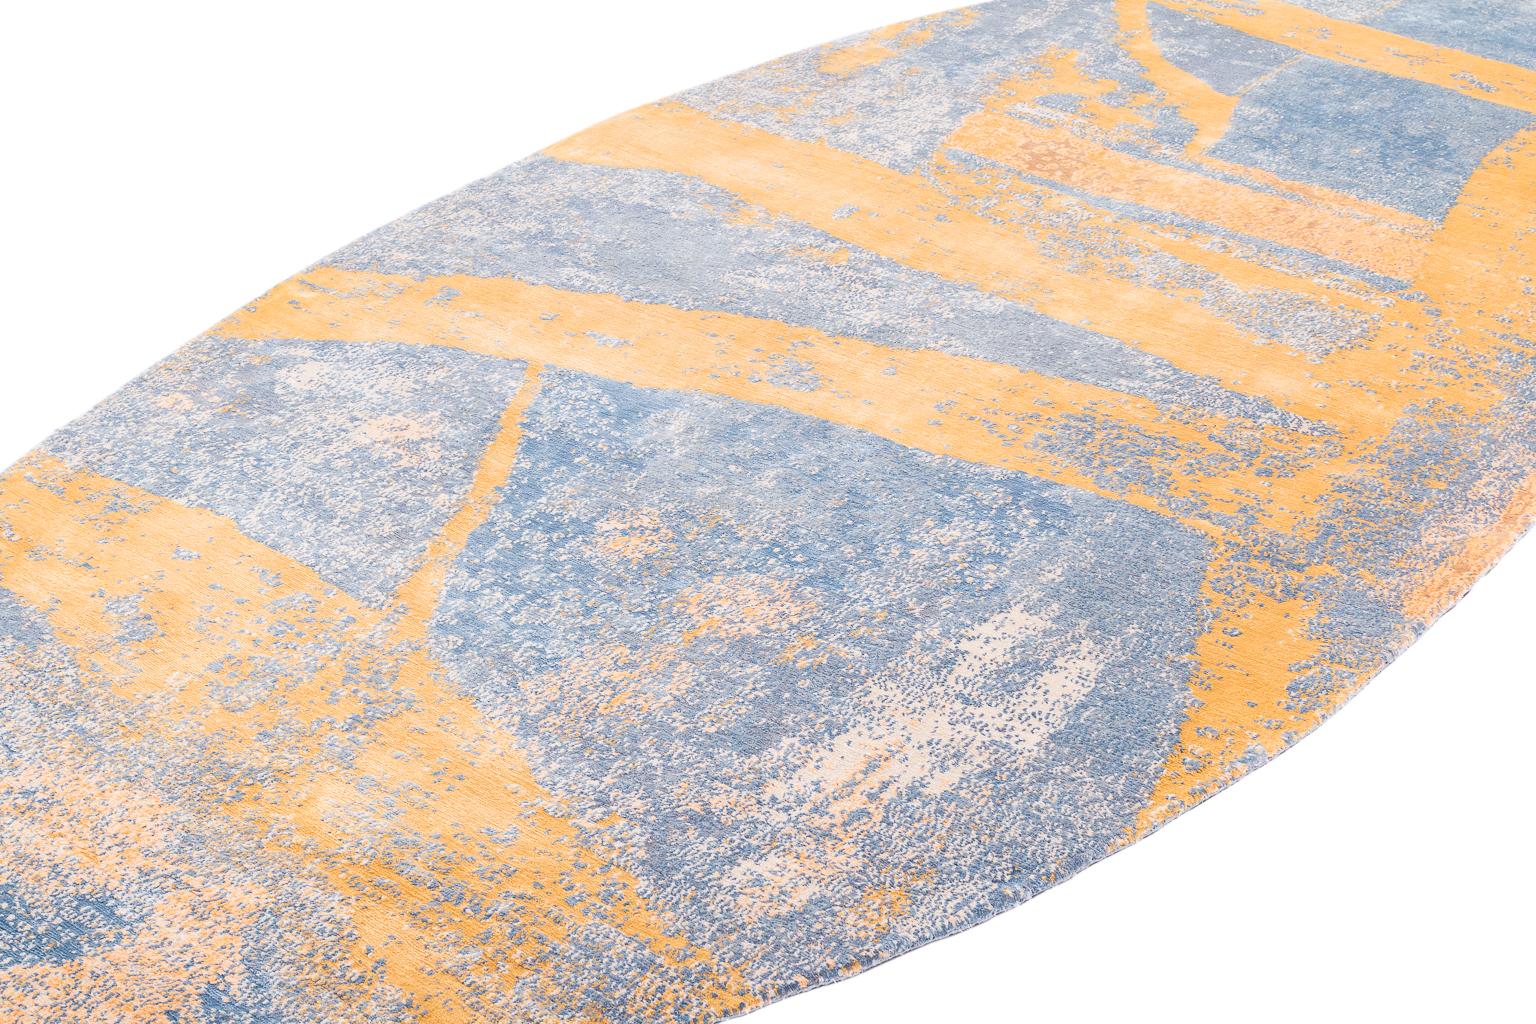 A collaboration between creative minds Joseph Carini and Karl Klingbiel, tractor trailer is a boldly captivating design. This oval shaped rug has an icy blue field which is broken up with yellow brushstrokes. This contemporary design is painterly,